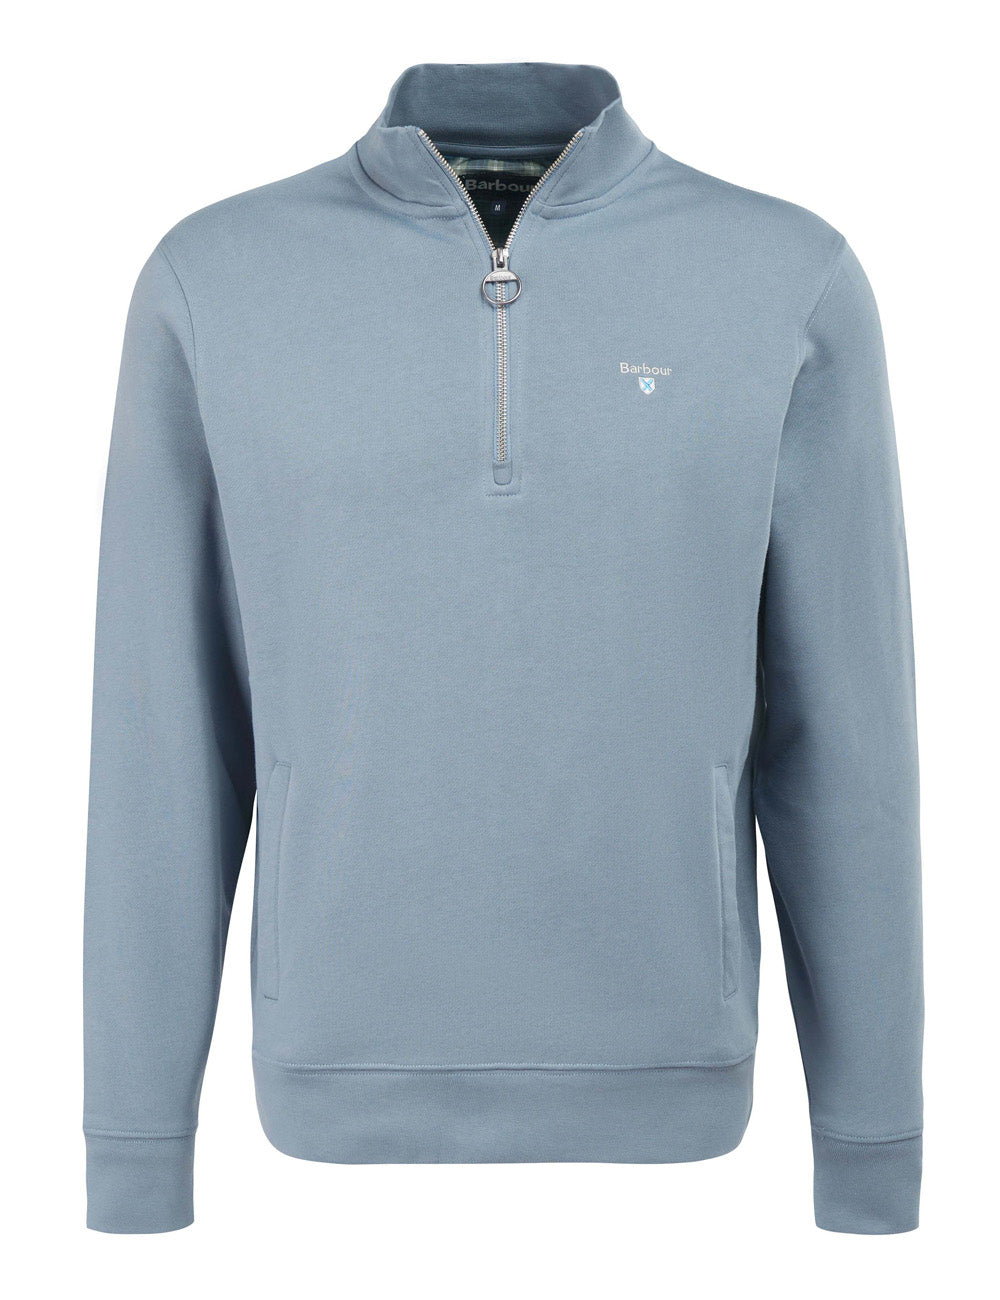 Barbour's Rothley Half Zip Sweatshirt in Washed Blue on a white background